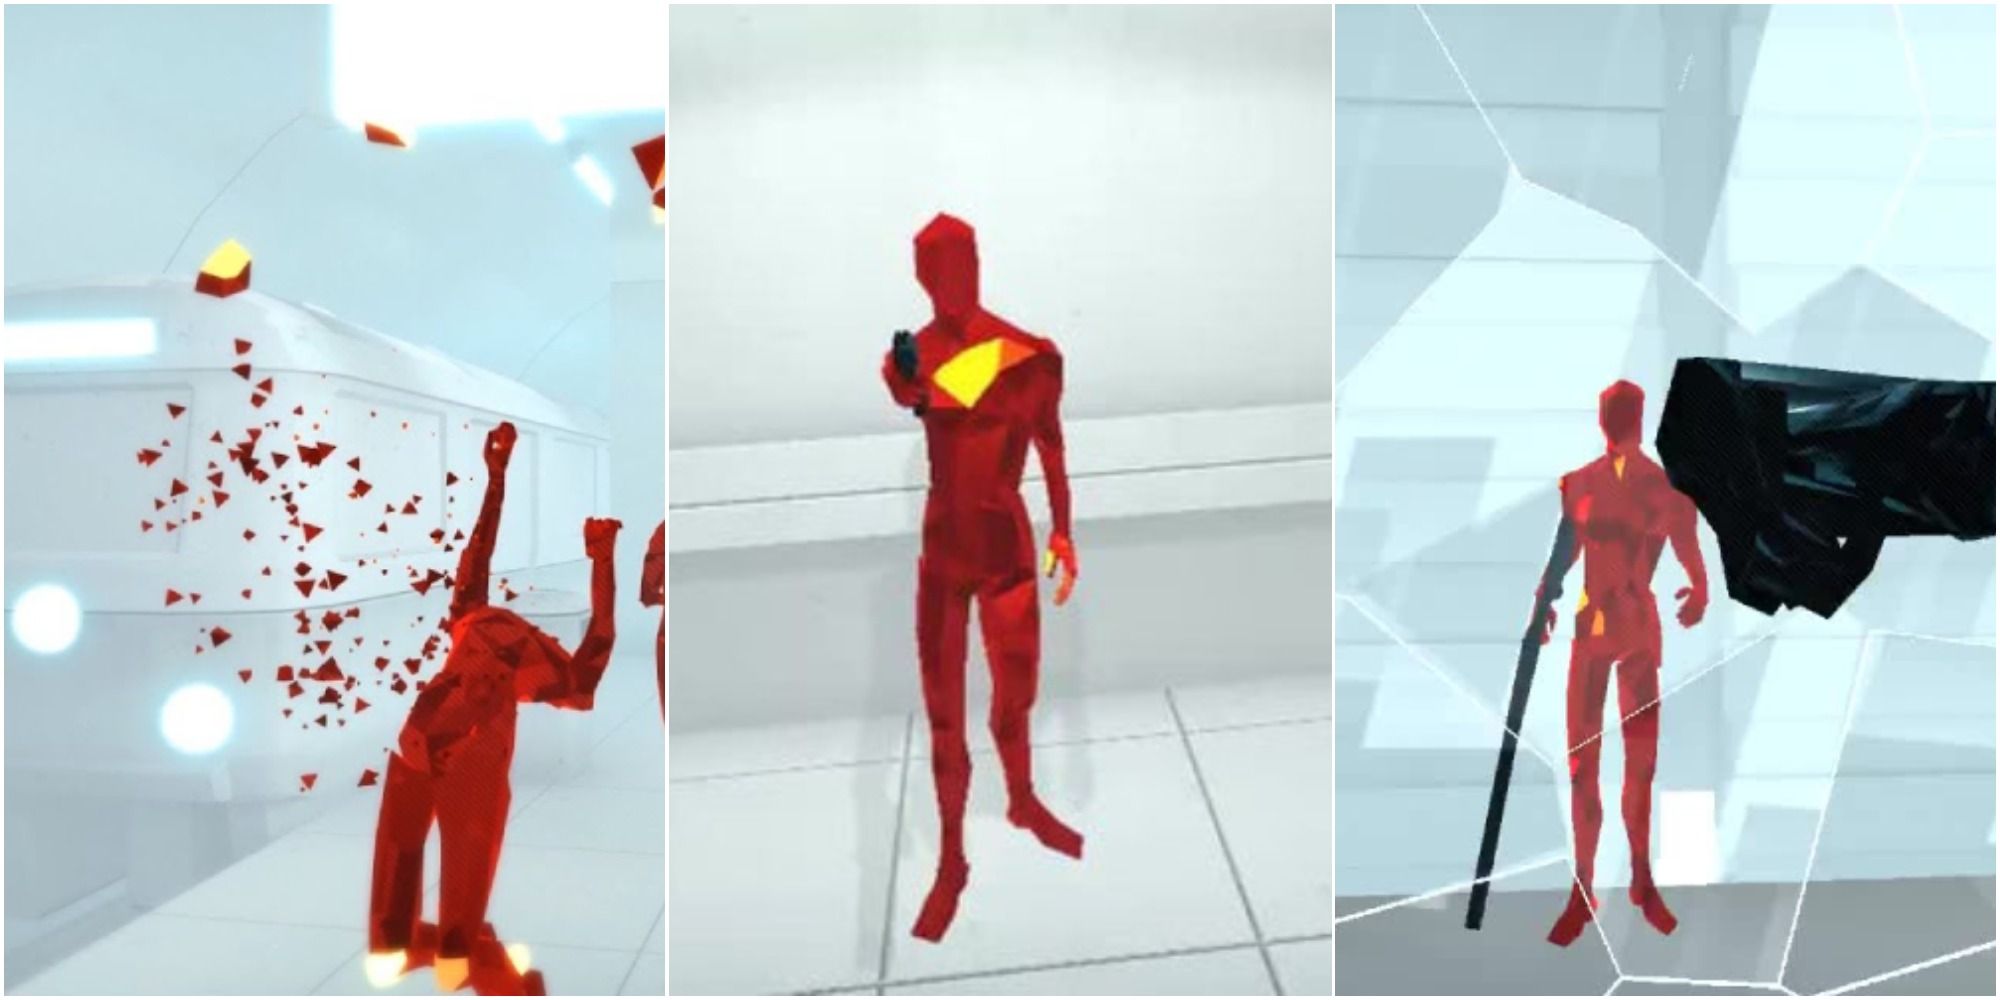 on the left is a dying red guy in front of a train, in the middle is a red guy in an elevator and on the right is a fist punching glass